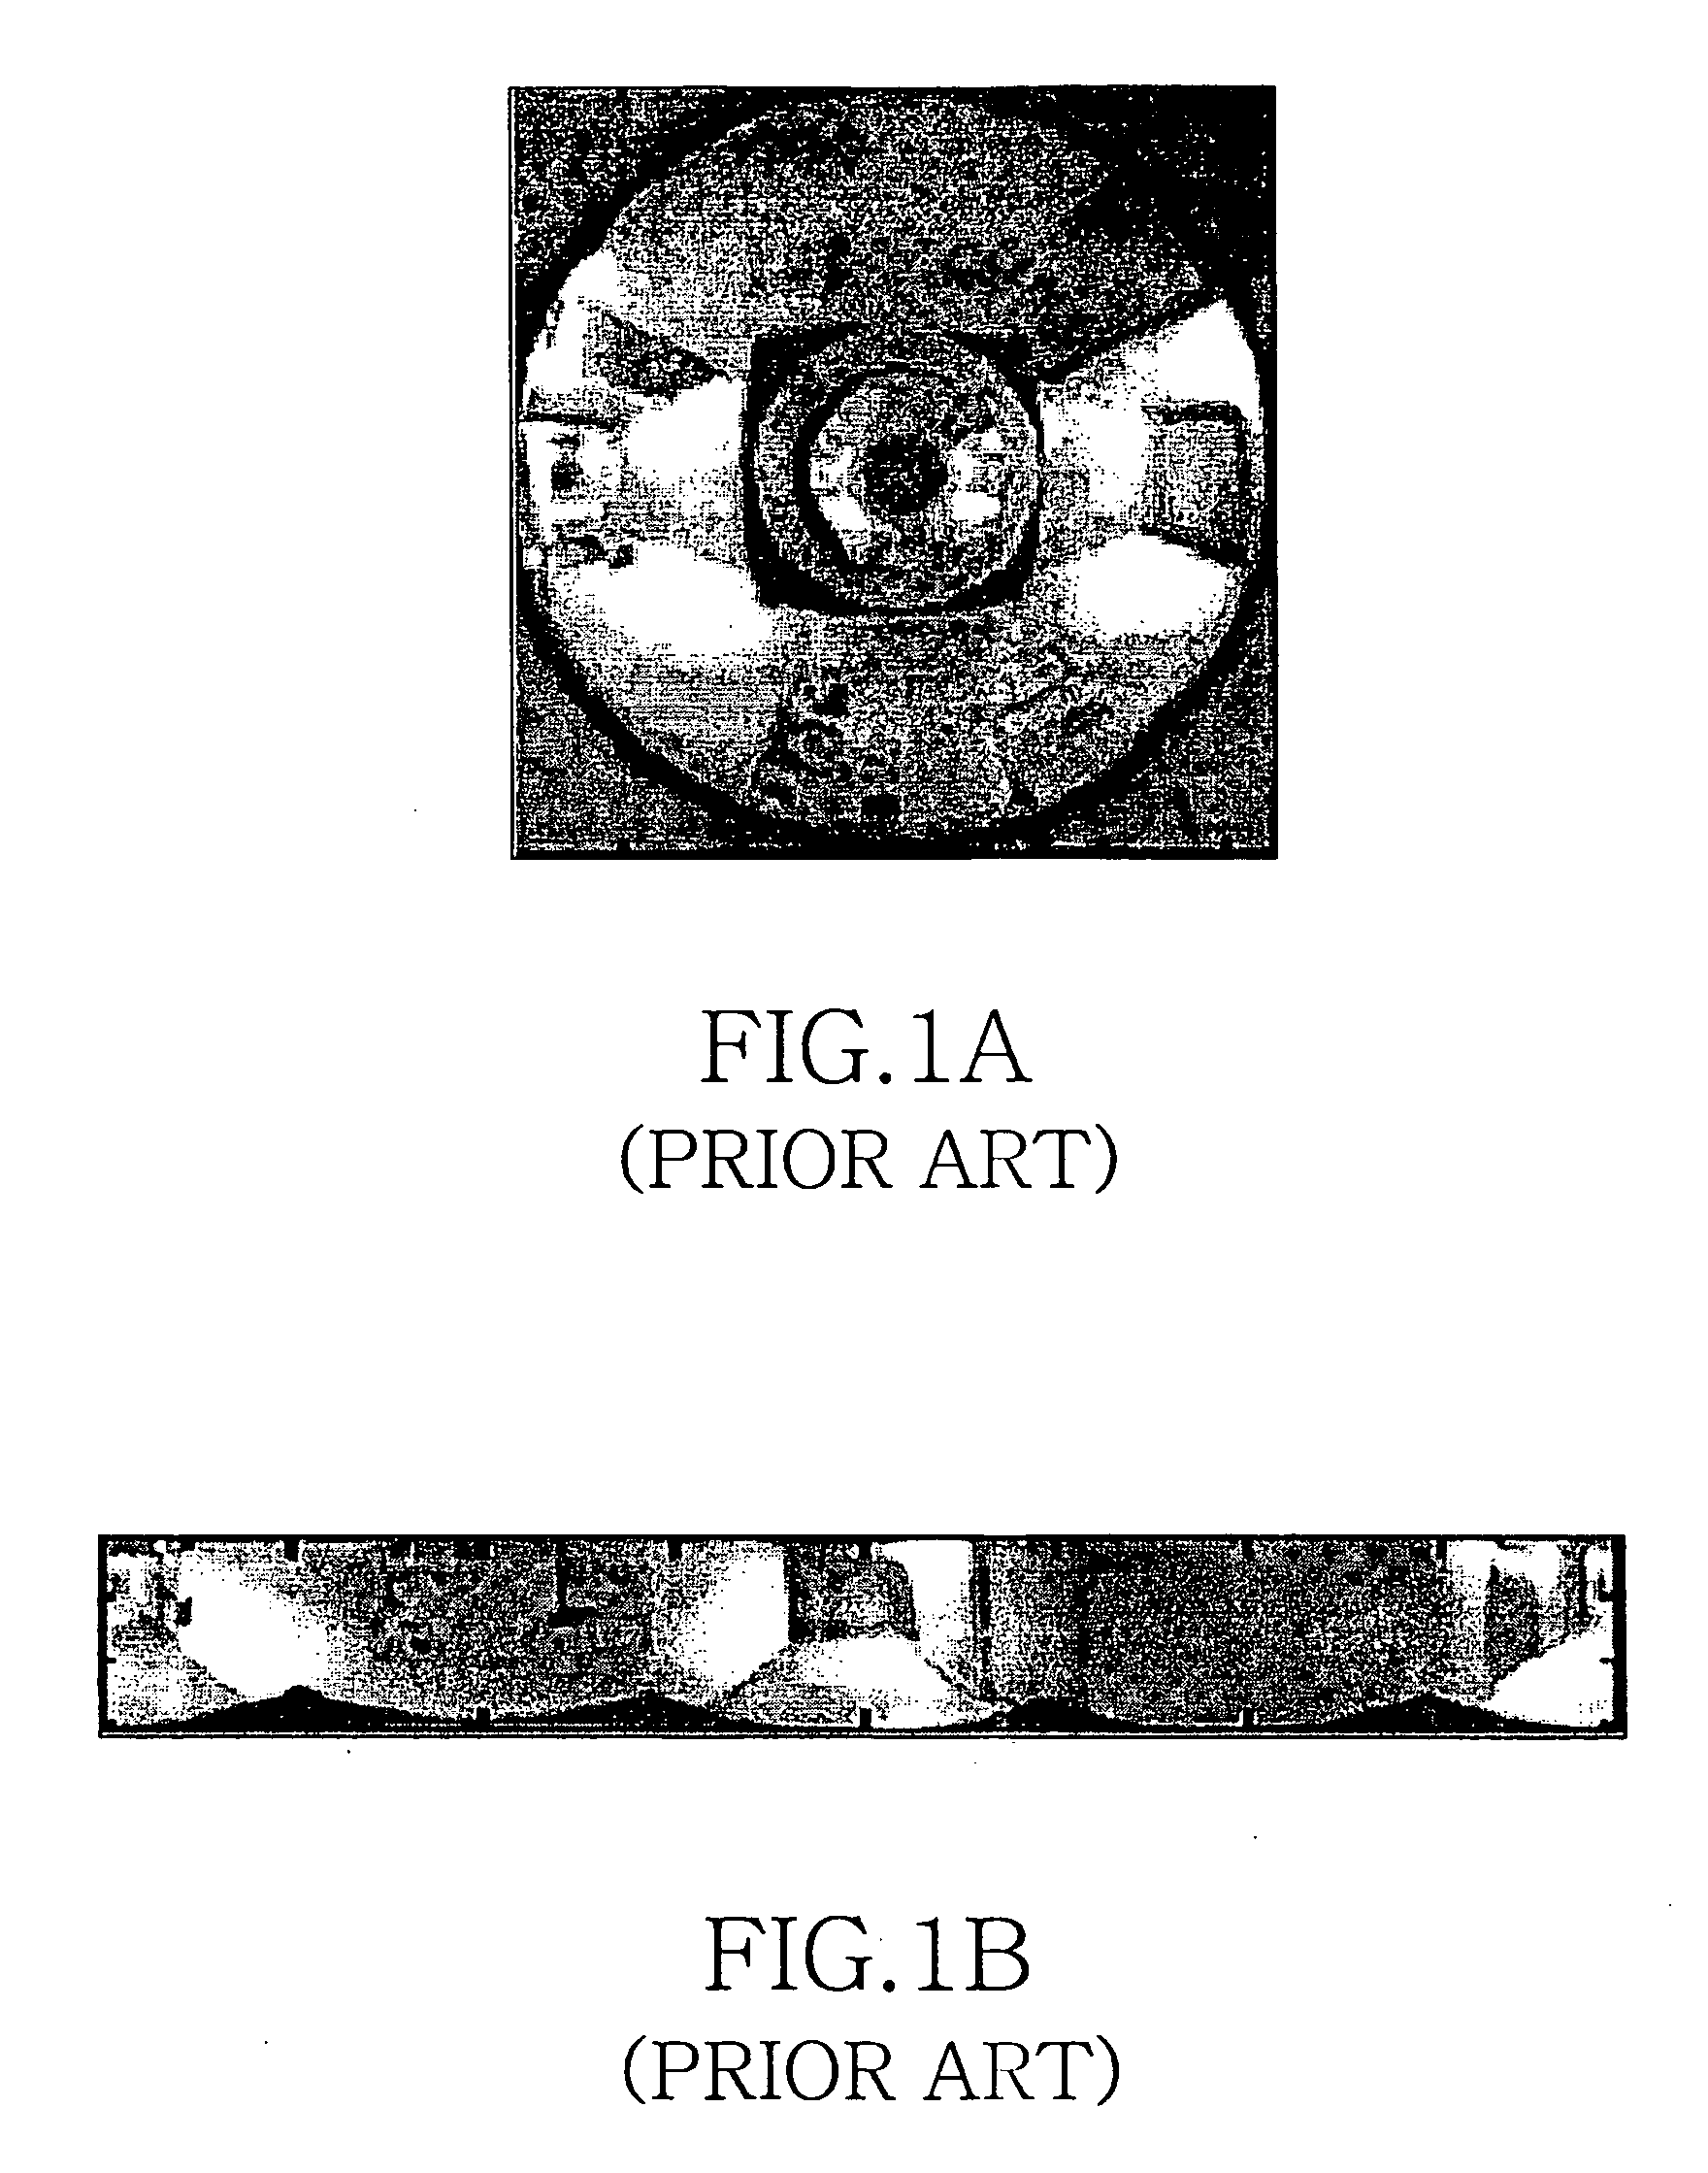 Unmanned monitoring system and monitoring method using omni-directional camera